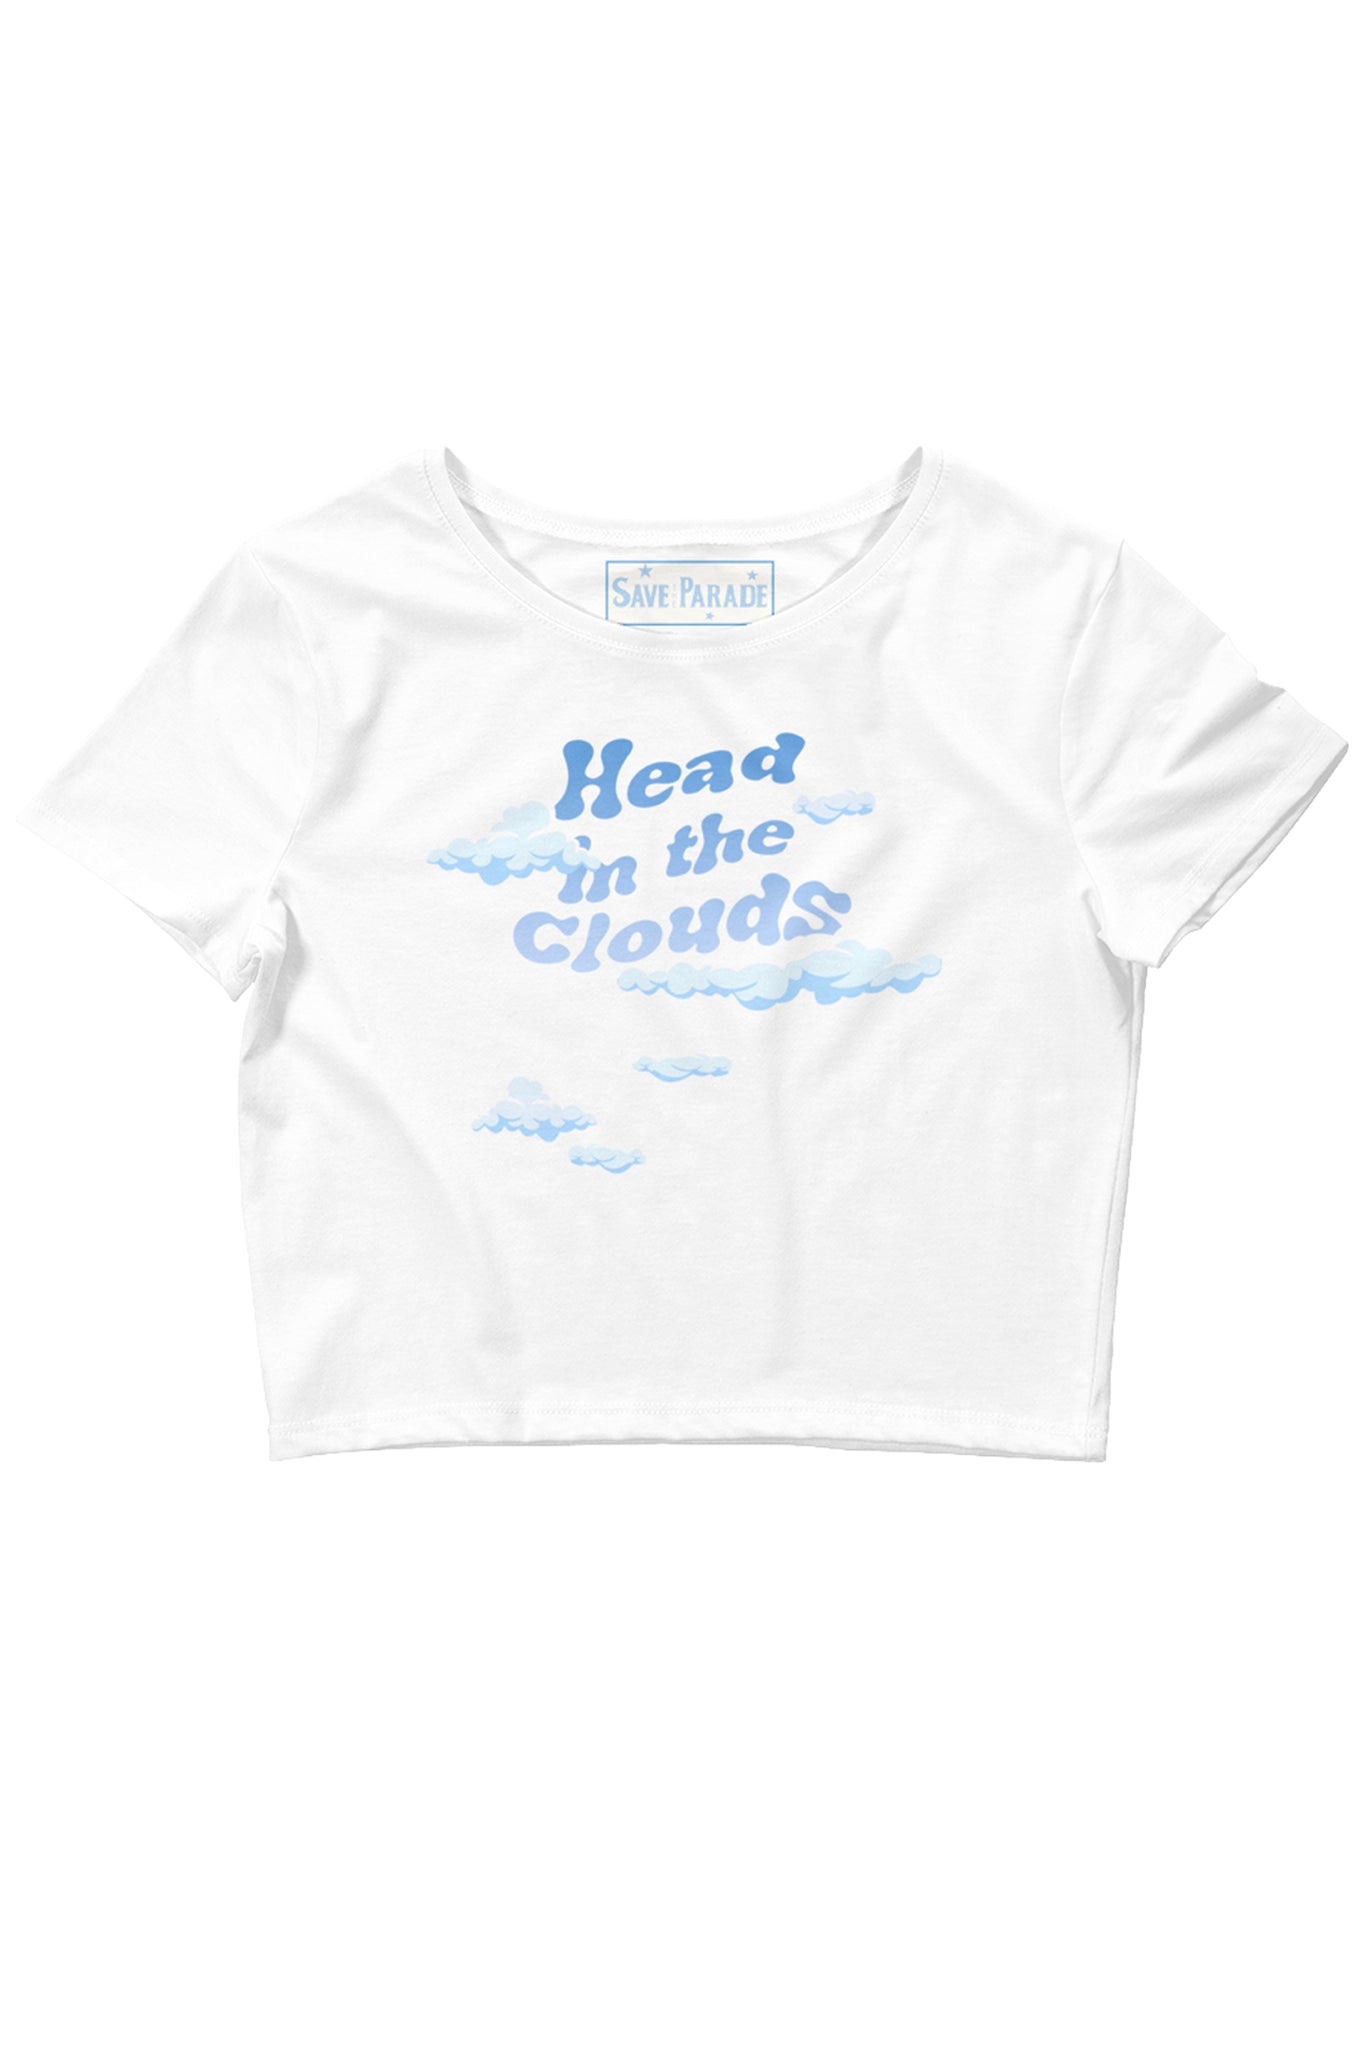 Head In The Clouds ☁︎ Baby Tee